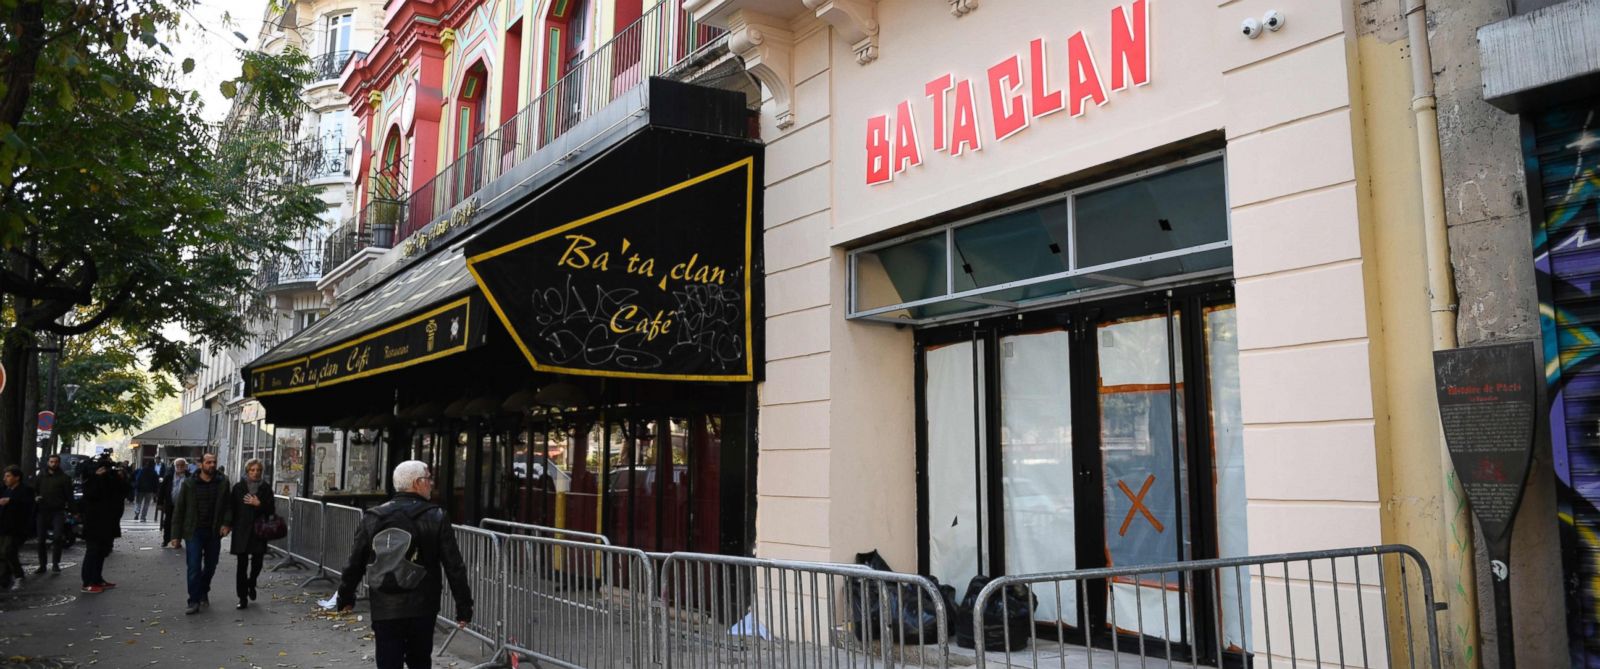 PHOTO: The Bataclan concert hall, one of the targets of the November 